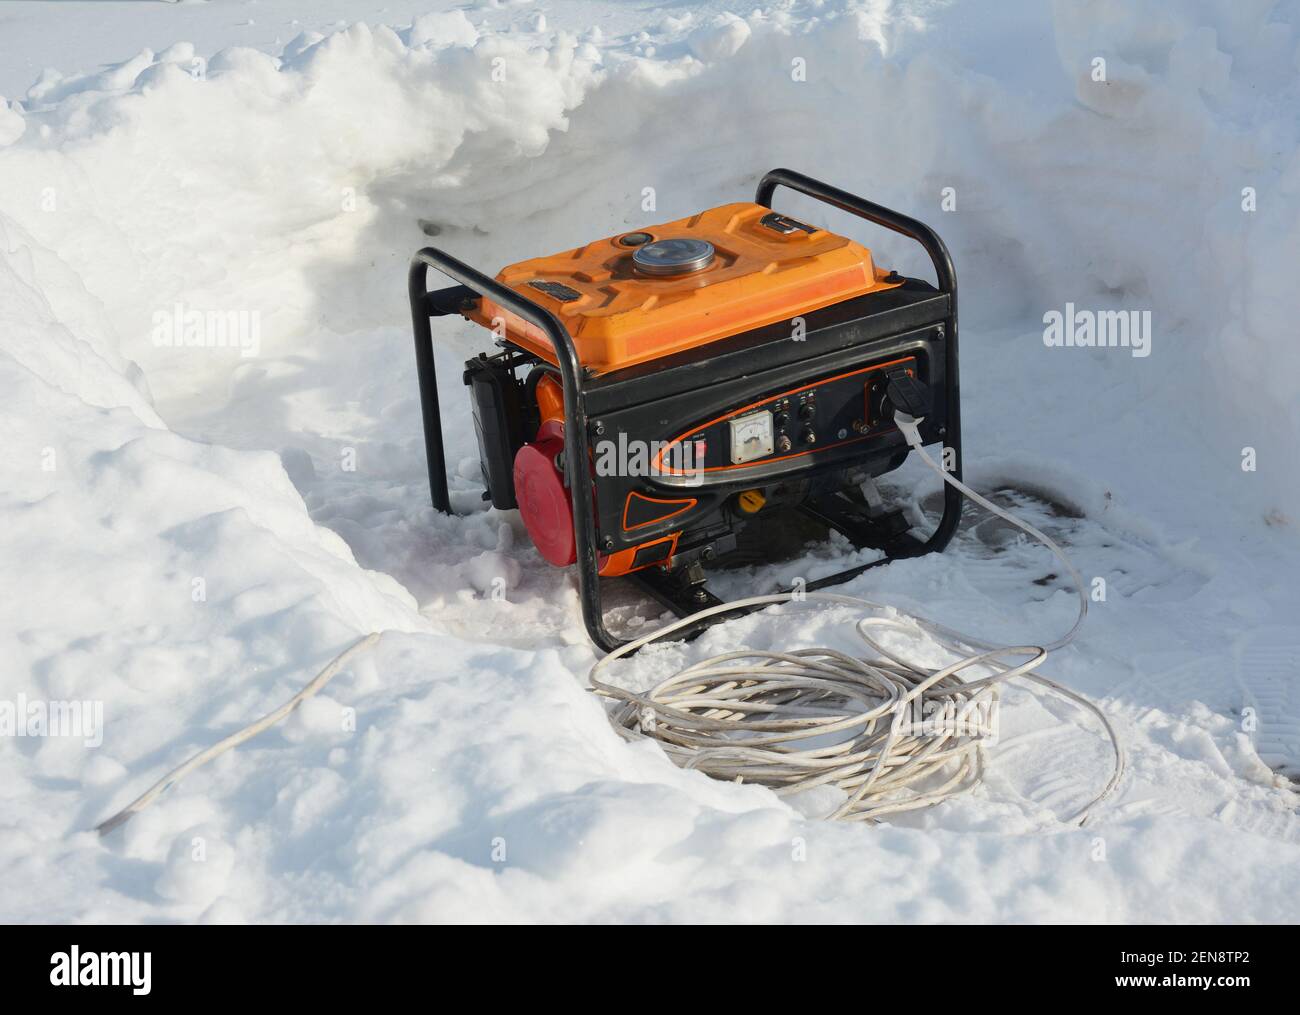 Usage of gasoline portable outdoor generator, home power generator to backup the house during blackouts, outages as a result of a winter storm. Stock Photo